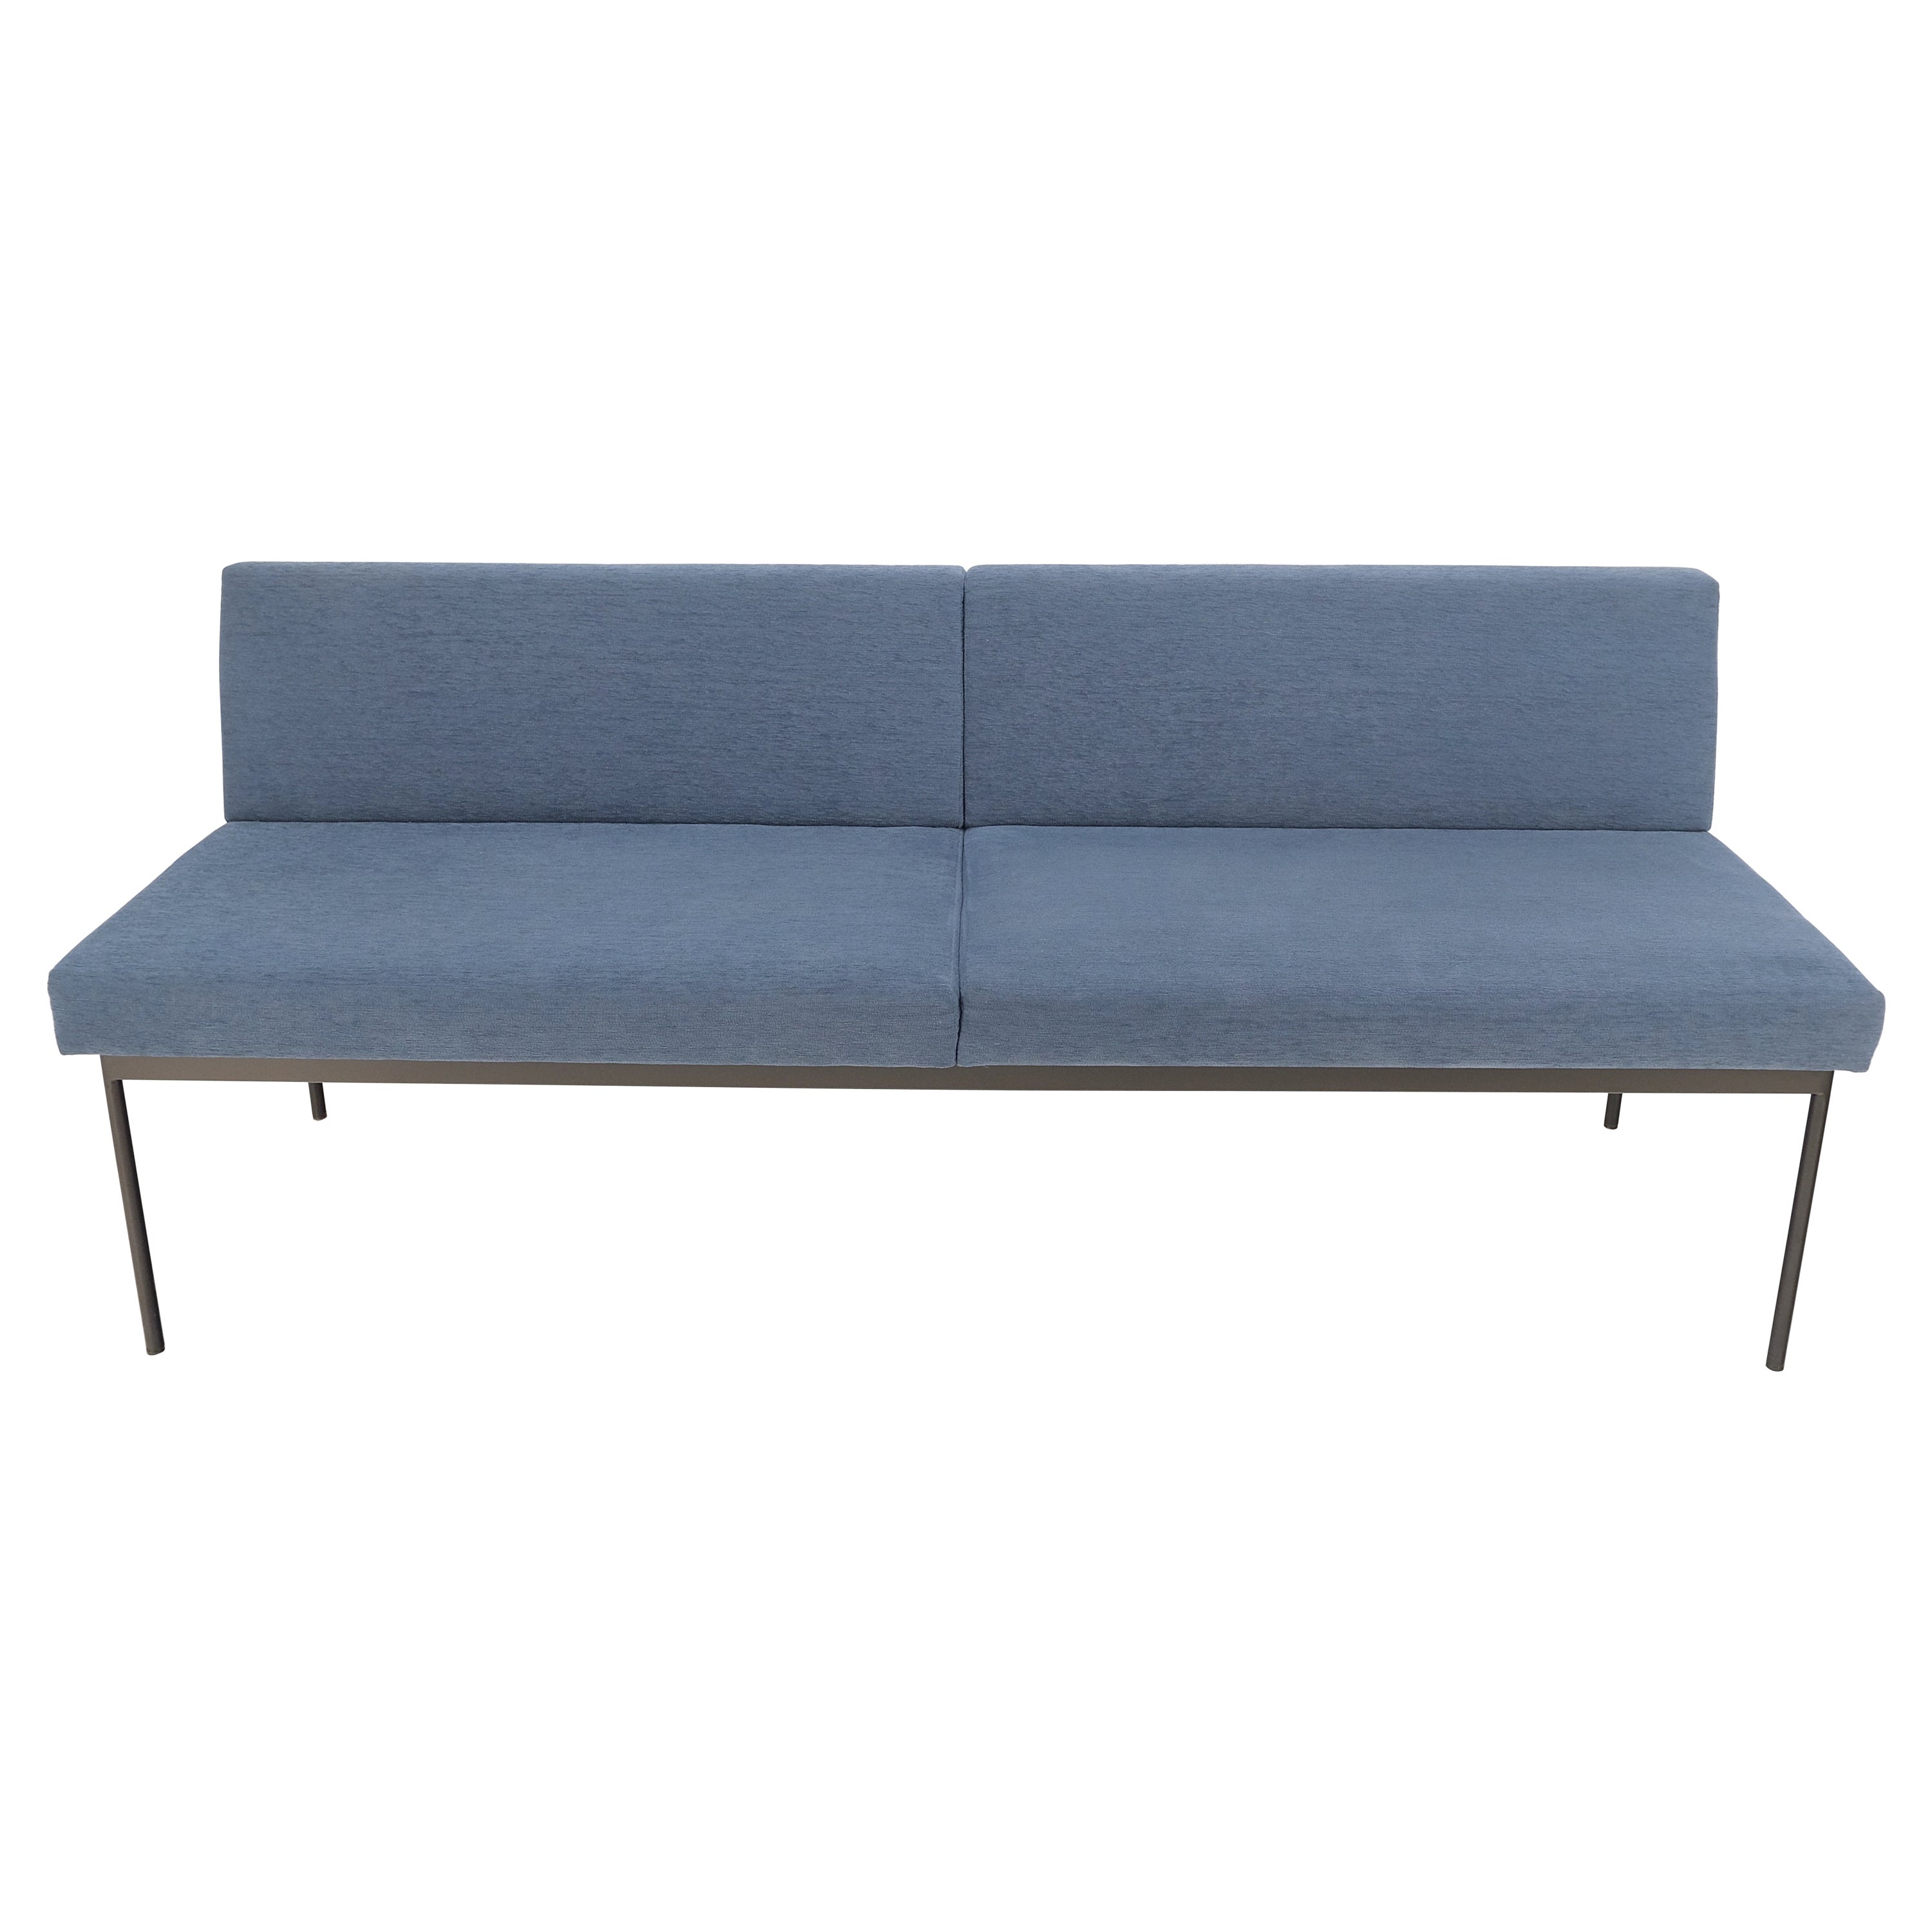 Geiger Tuxido Lounge Sofa Couch Bench Seating Blue Upholstery Black Frame Mint For Sale